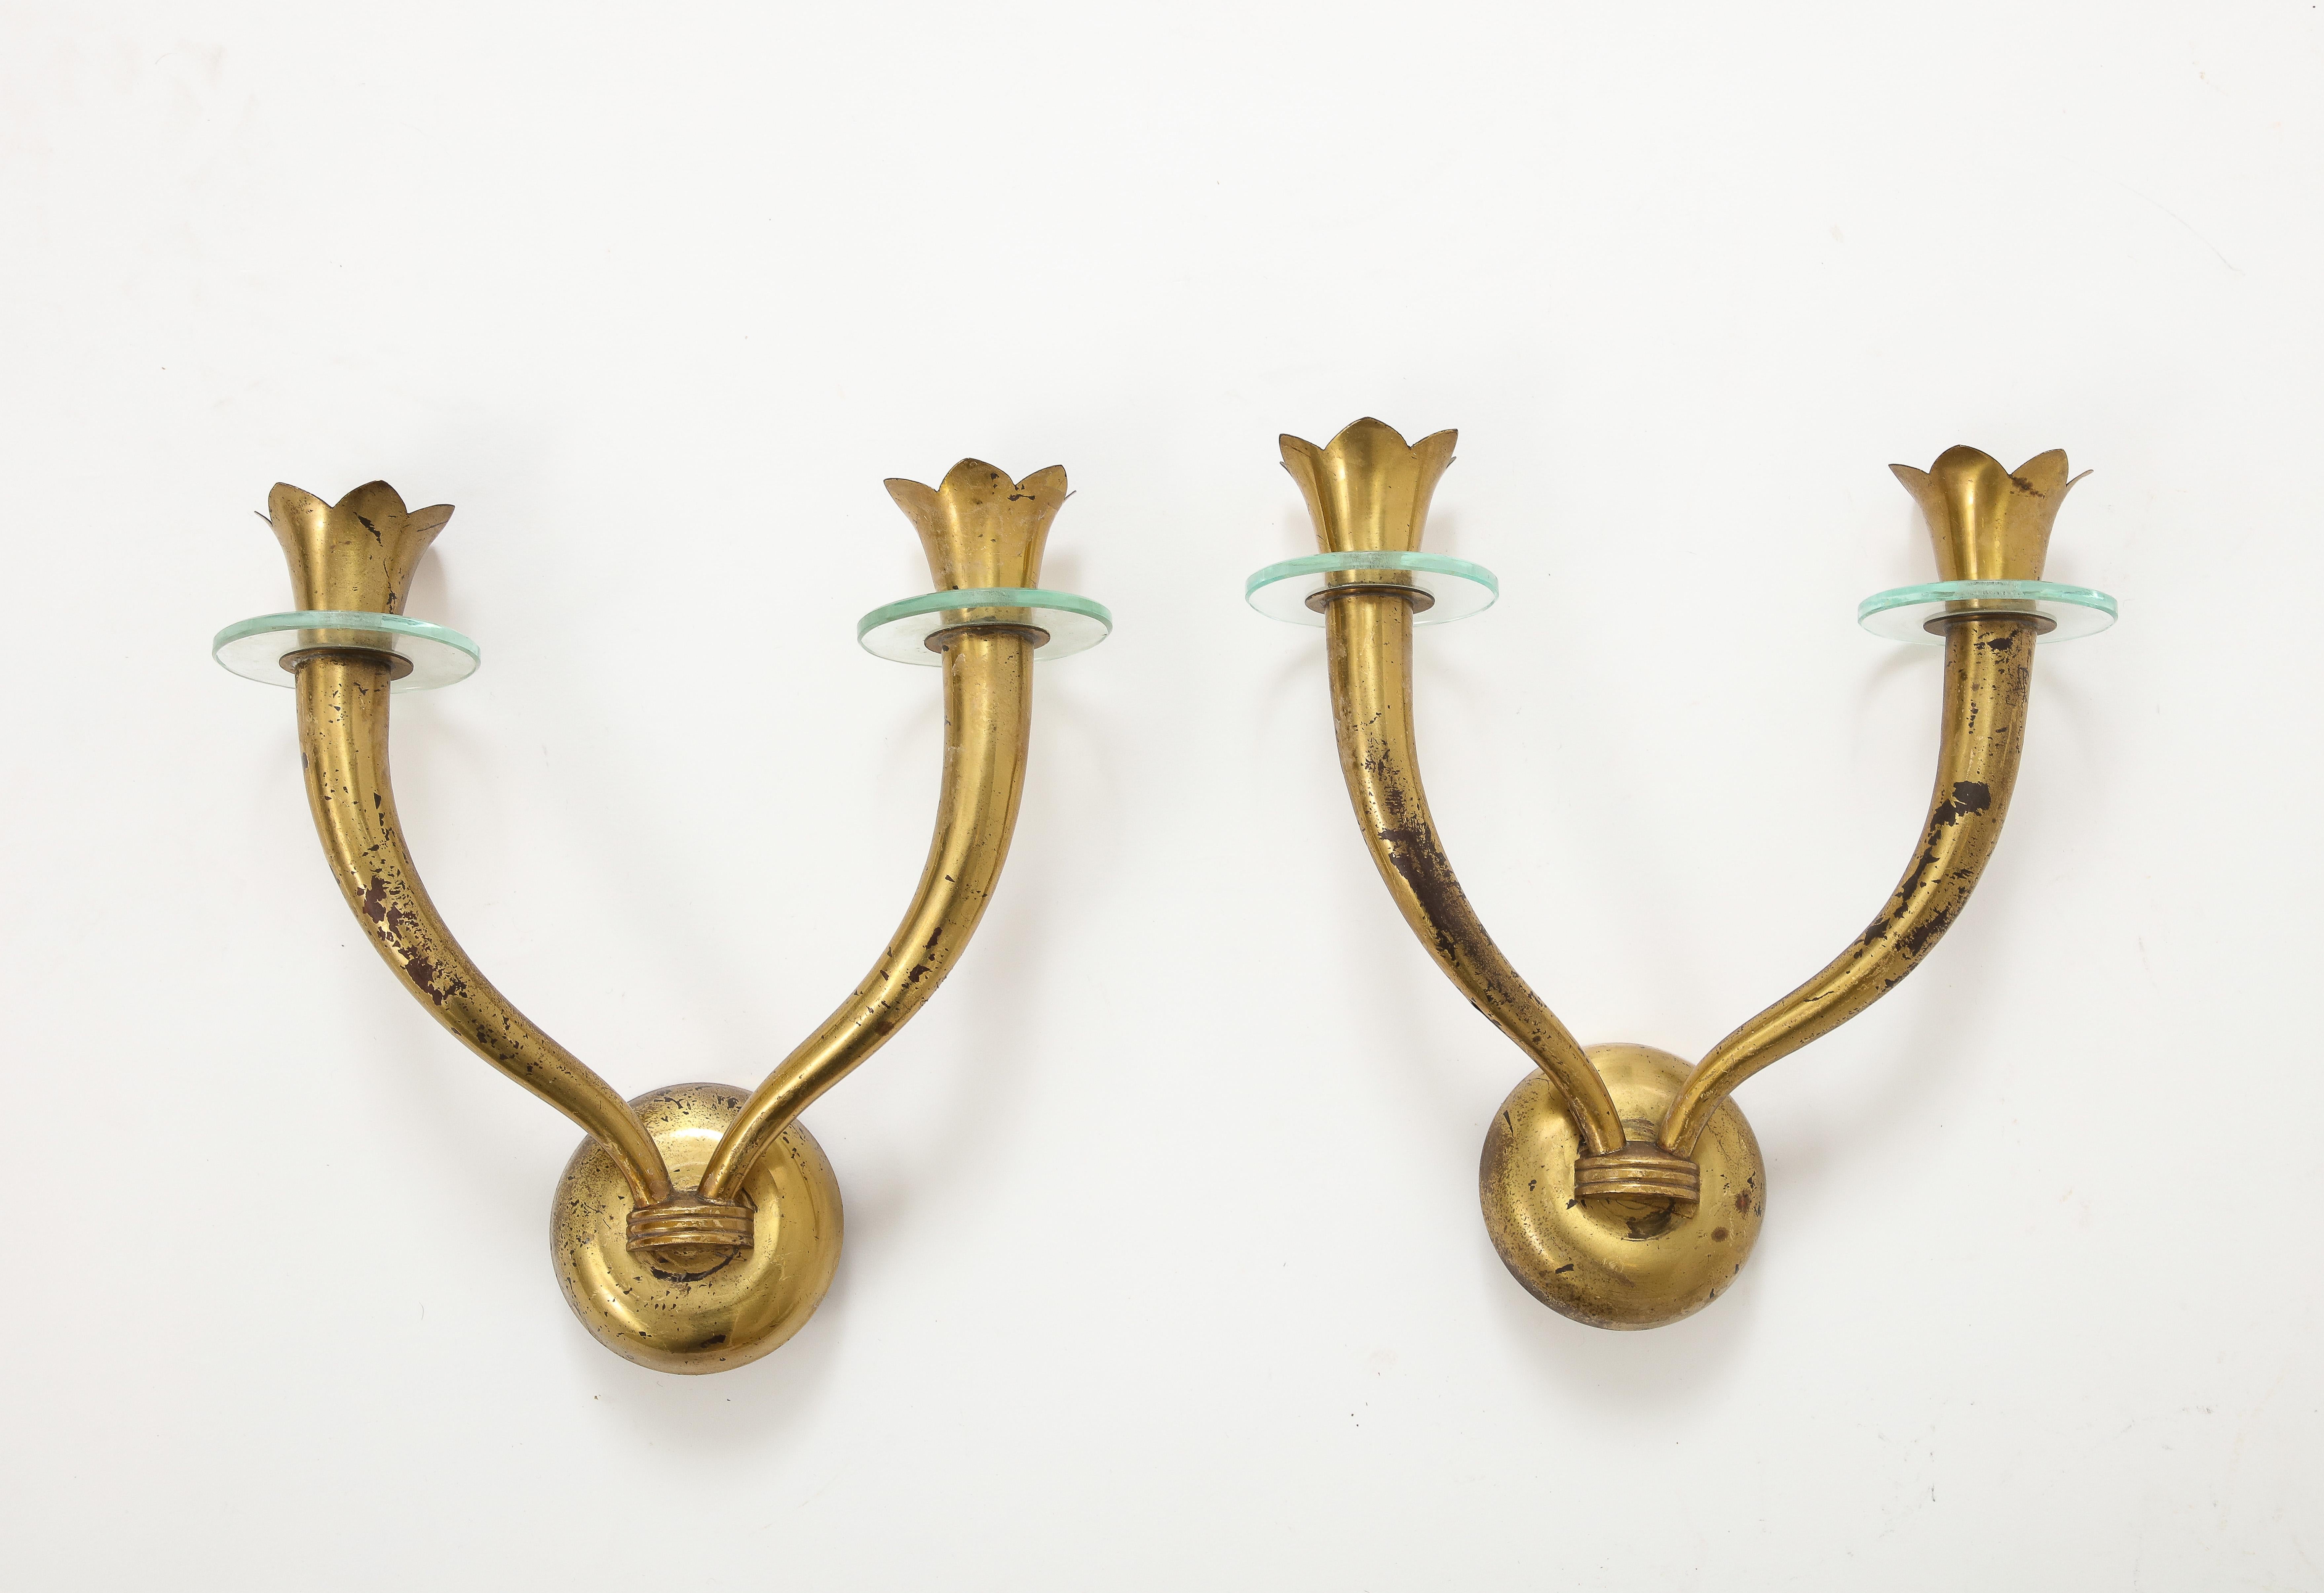 Pair of Brass and Glass Modernist Sconces Att. Emilio Lancia - Italy 1950s For Sale 2